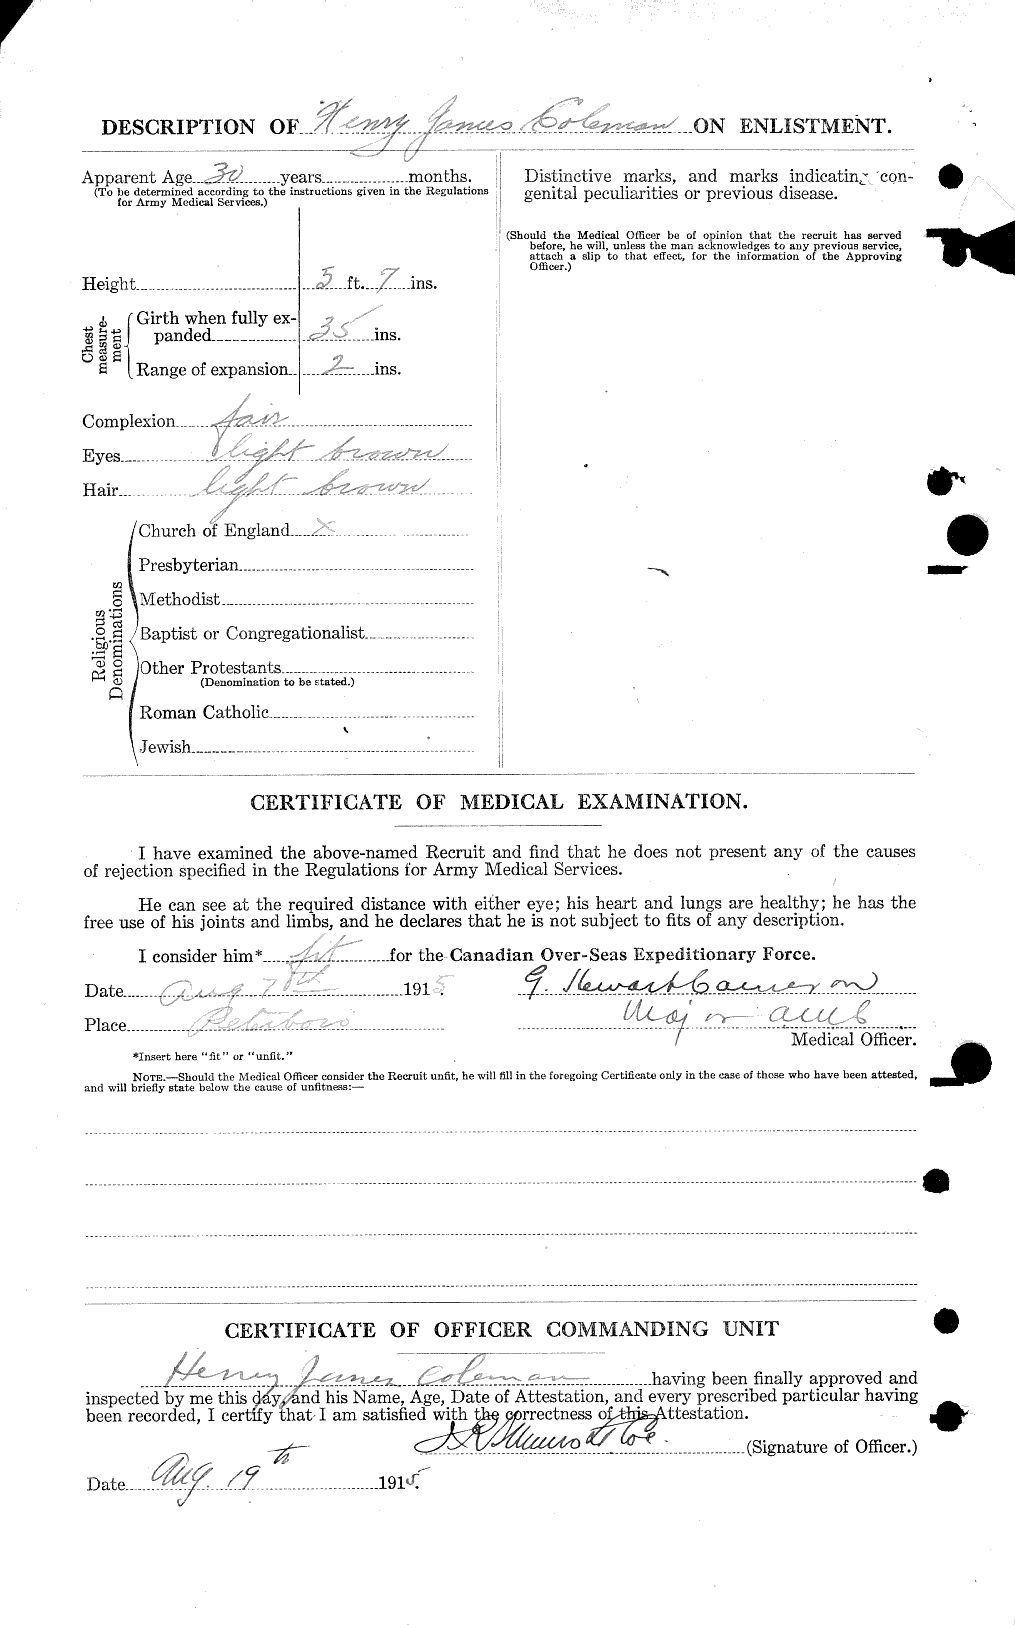 Personnel Records of the First World War - CEF 028169b